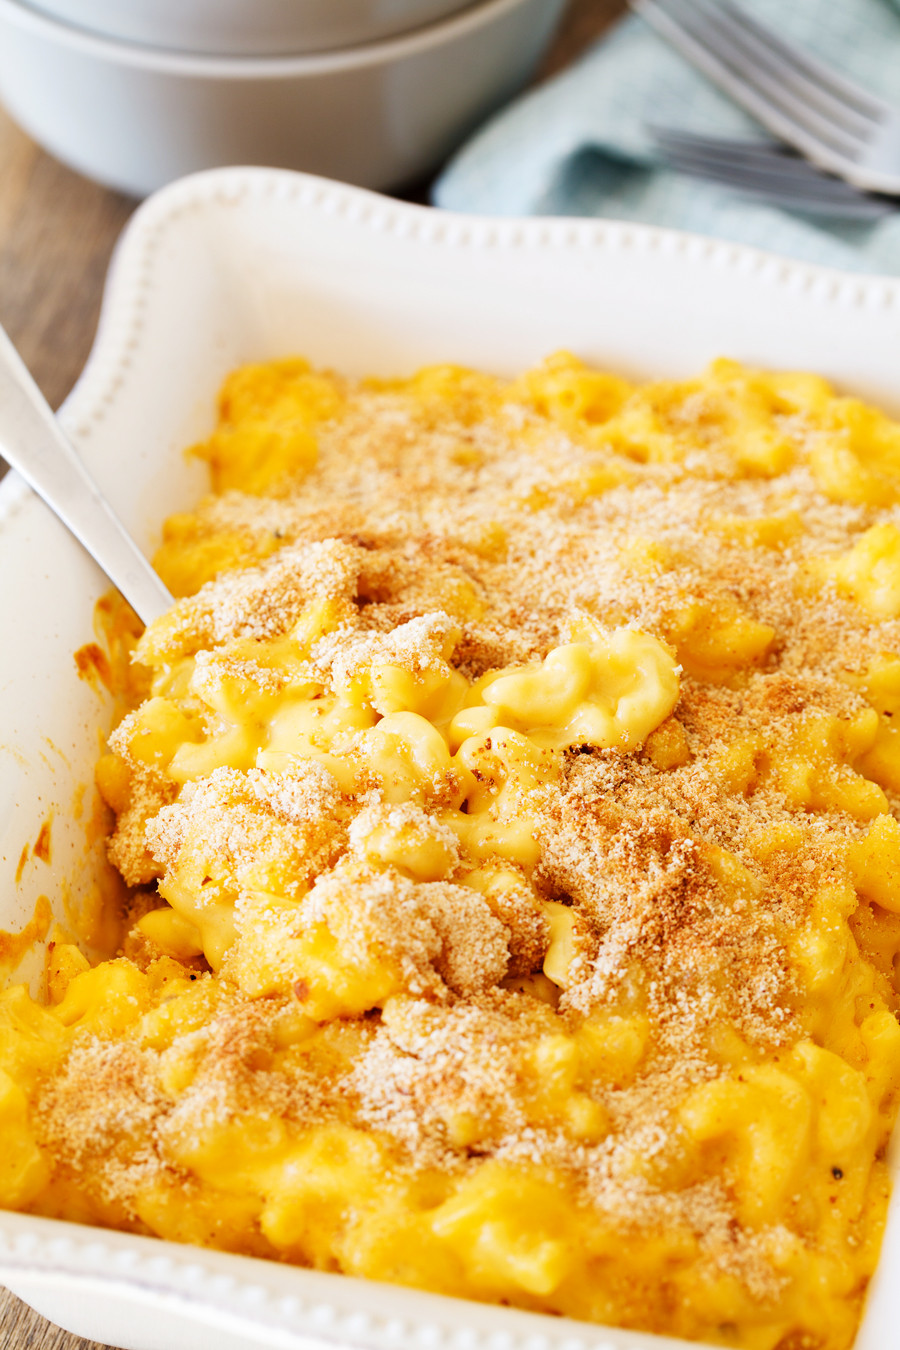 Baked Macaroni And Cheese With Bread Crumbs Recipe
 Easy Baked Macaroni & Cheese Made To Be A Momma